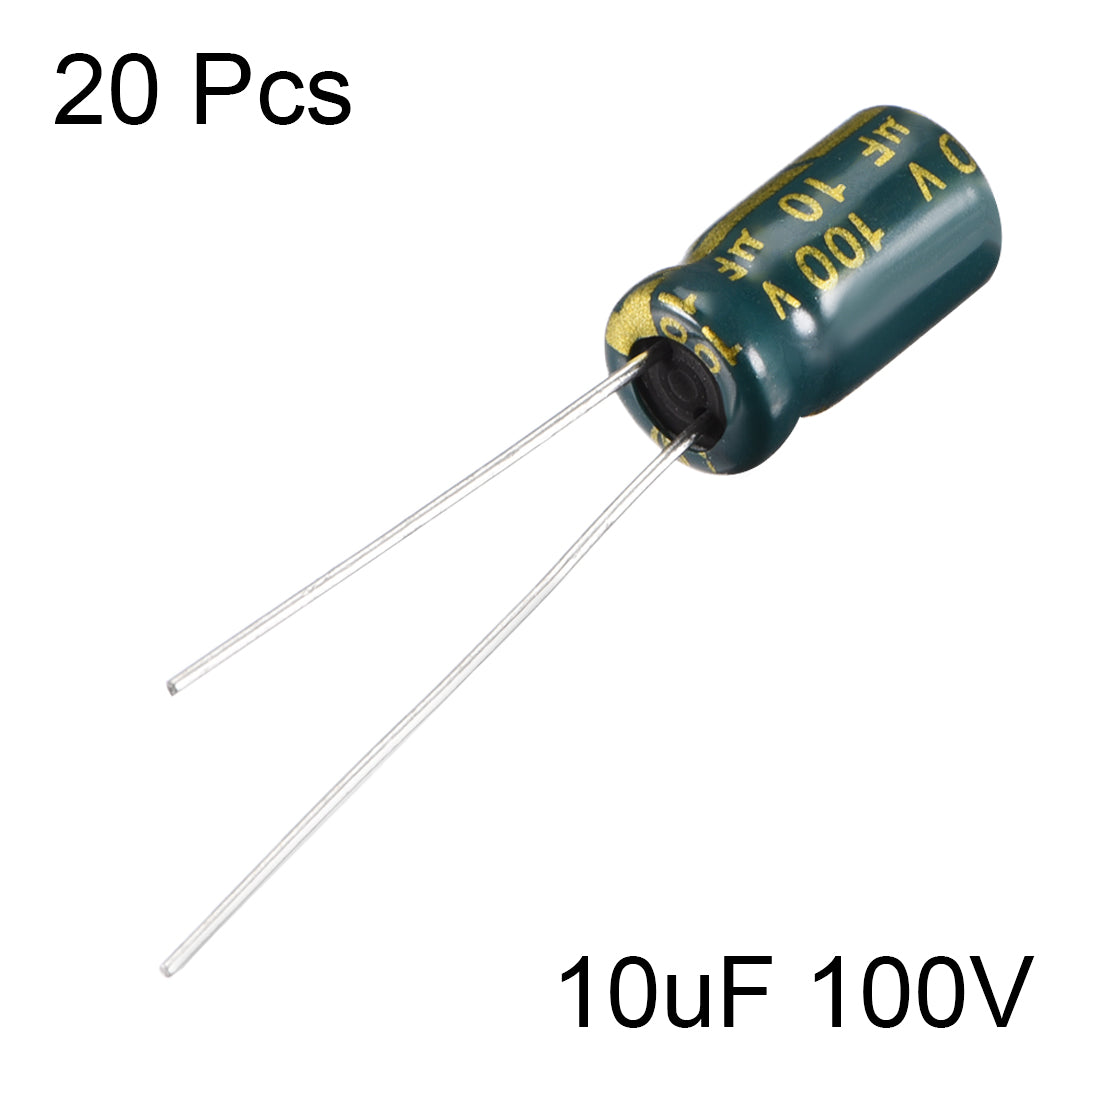 uxcell Uxcell Aluminum Radial Electrolytic Capacitor Low ESR Green with 10uF 100V 105 Celsius Life 3000H 6.3 x 11 mm High Ripple Current,Low Impedance 20pcs